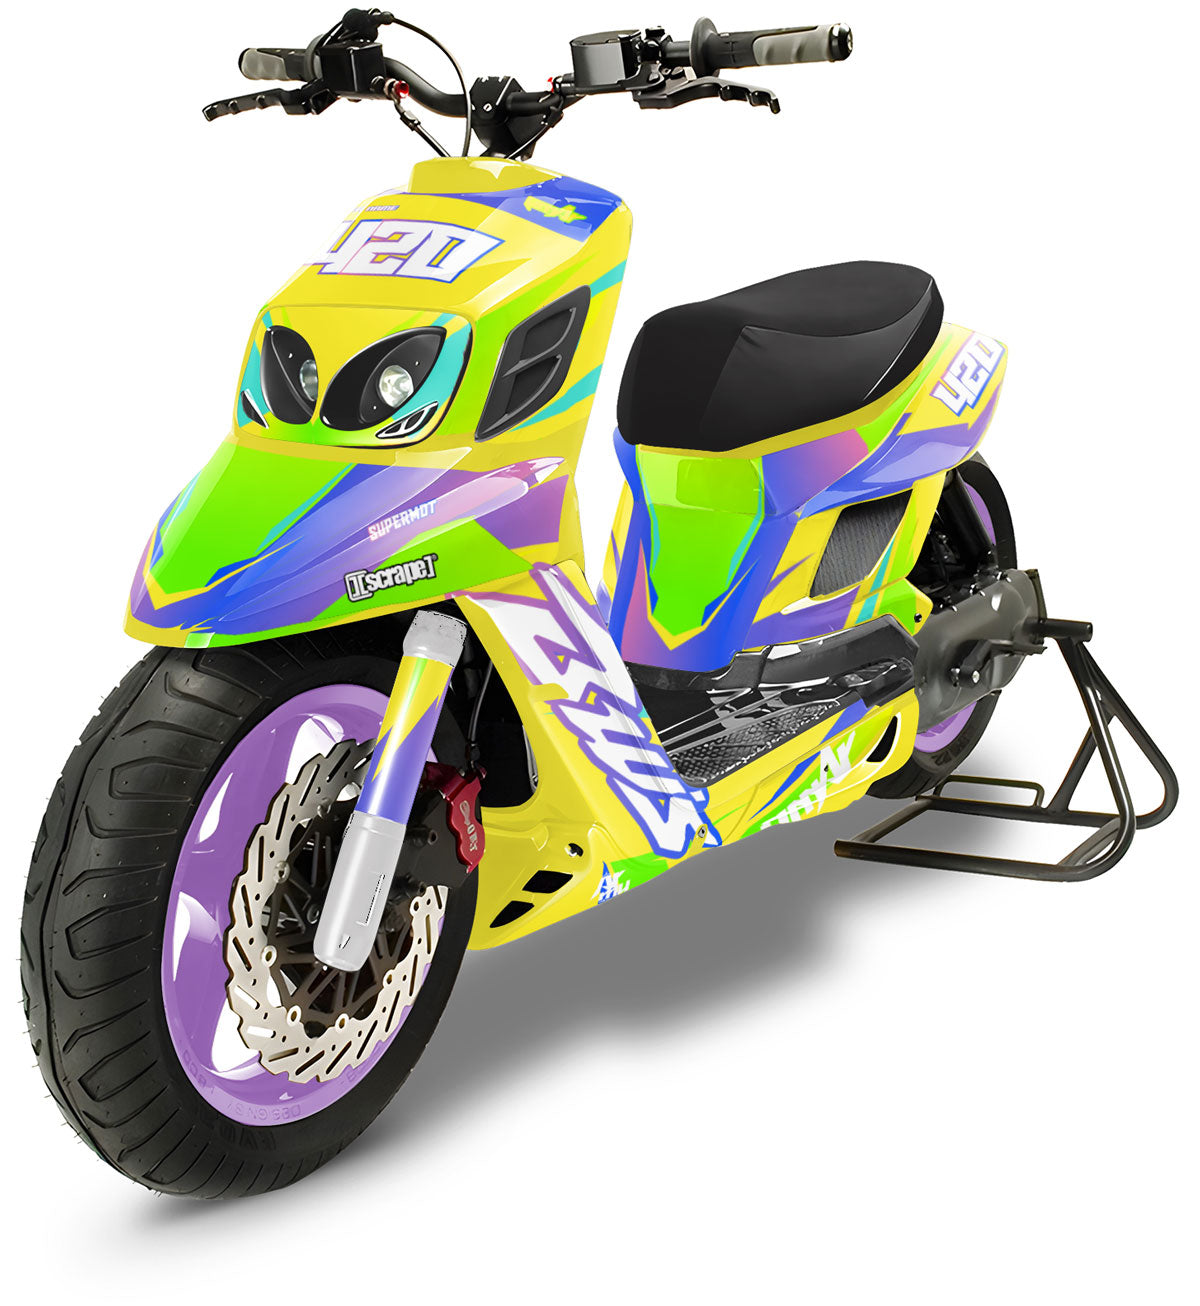 mbk booster spirit / yamaha bw's : r/scooters